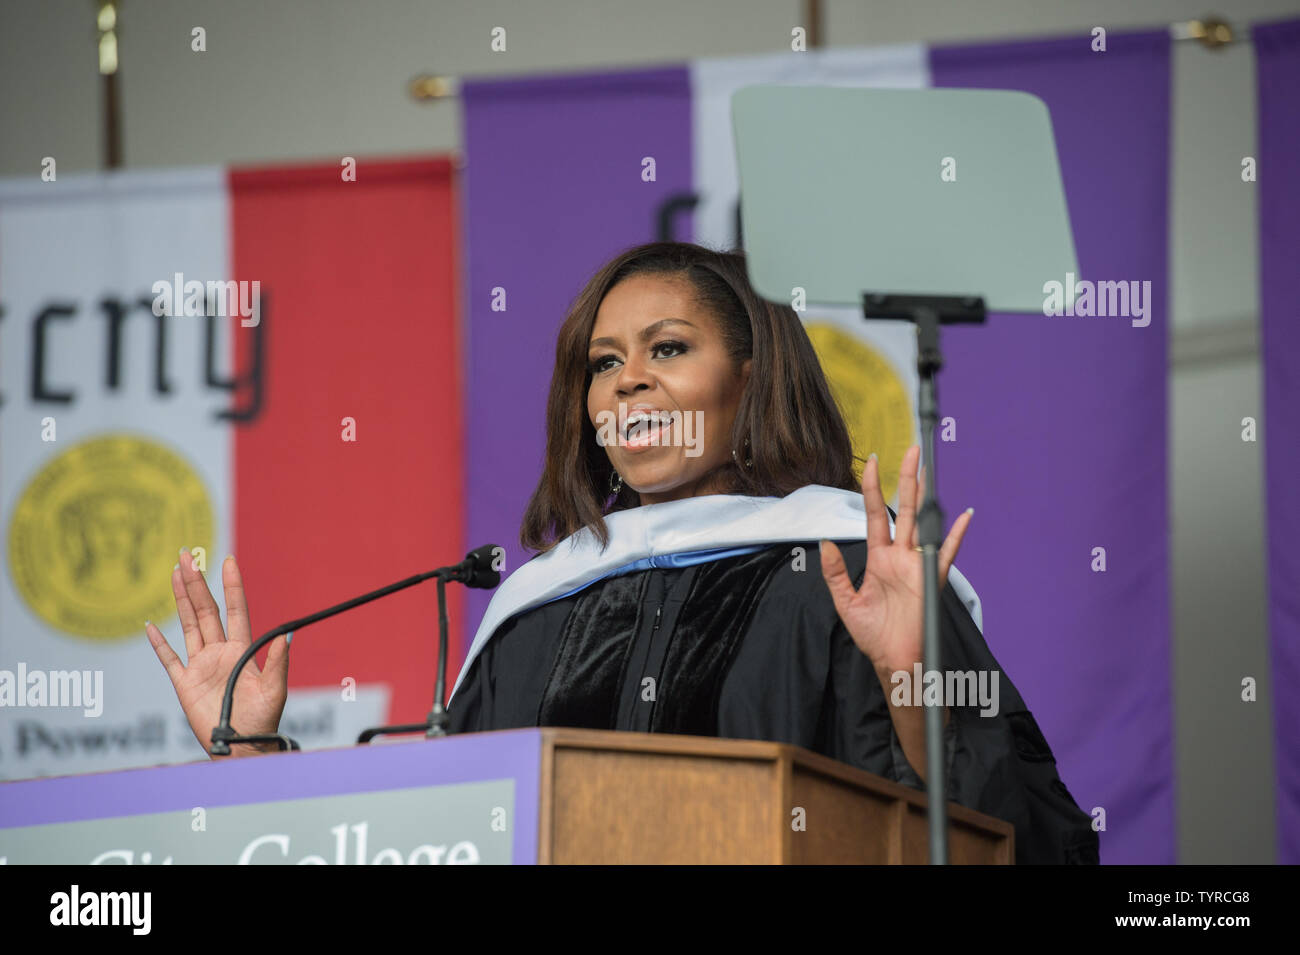 First Lady Michelle Obama delivers her final commencement address as First Lady at the 170th Commencement Ceremony of The City College of New York on the CCNY campus in historic Harlem, Friday, June 3, 2016. More than 3,000 students make up the Class of 2016.  Photo by Bryan R. Smith/UPI Stock Photo